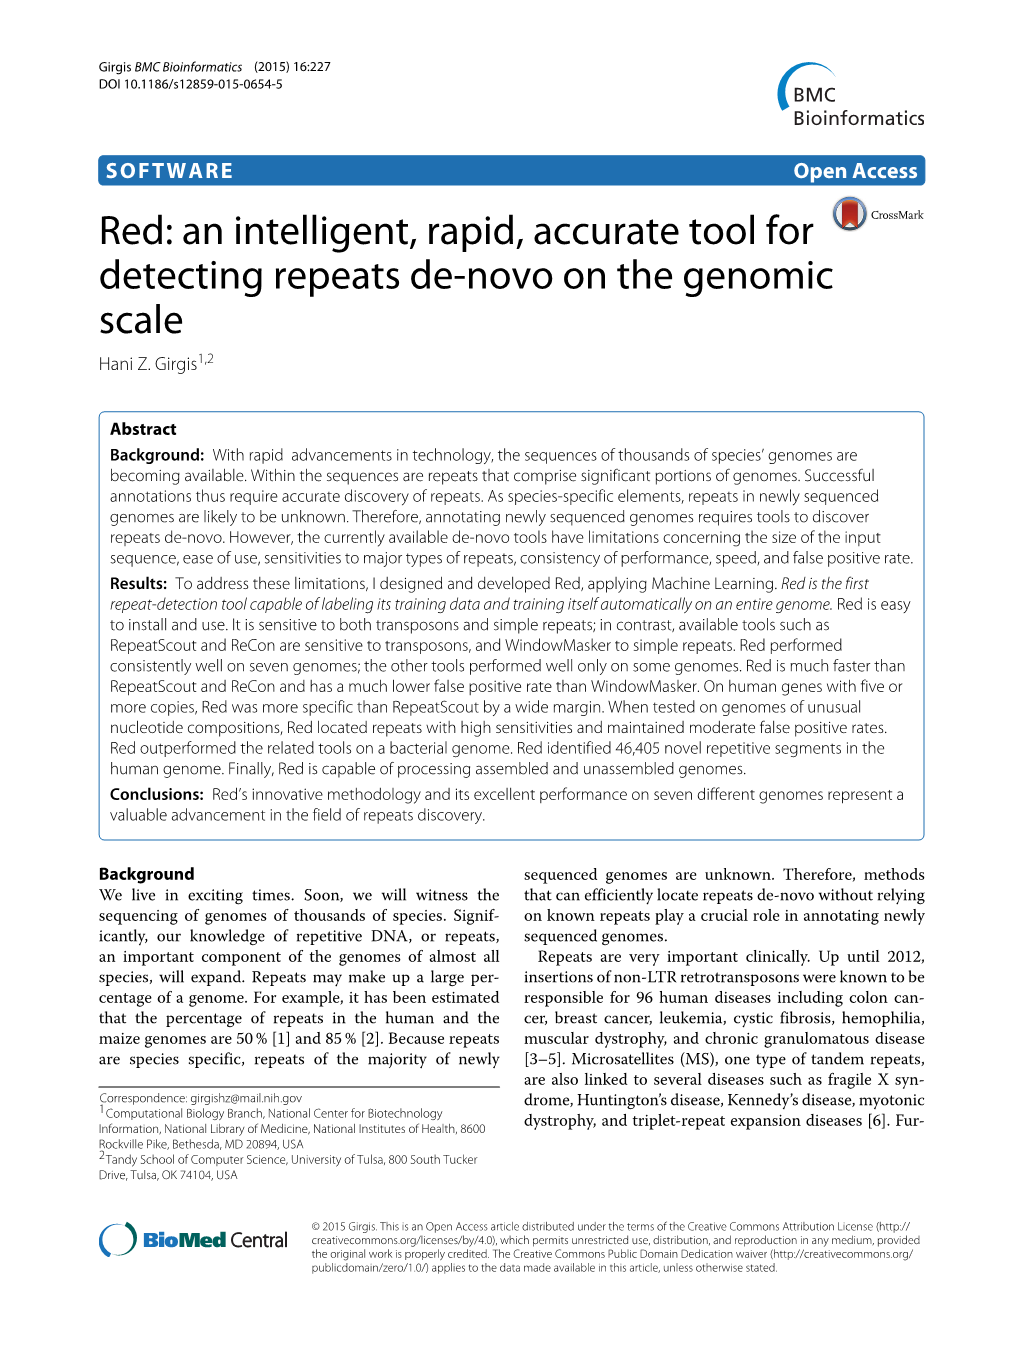 Red: an Intelligent, Rapid, Accurate Tool for Detecting Repeats De-Novo on the Genomic Scale Hani Z